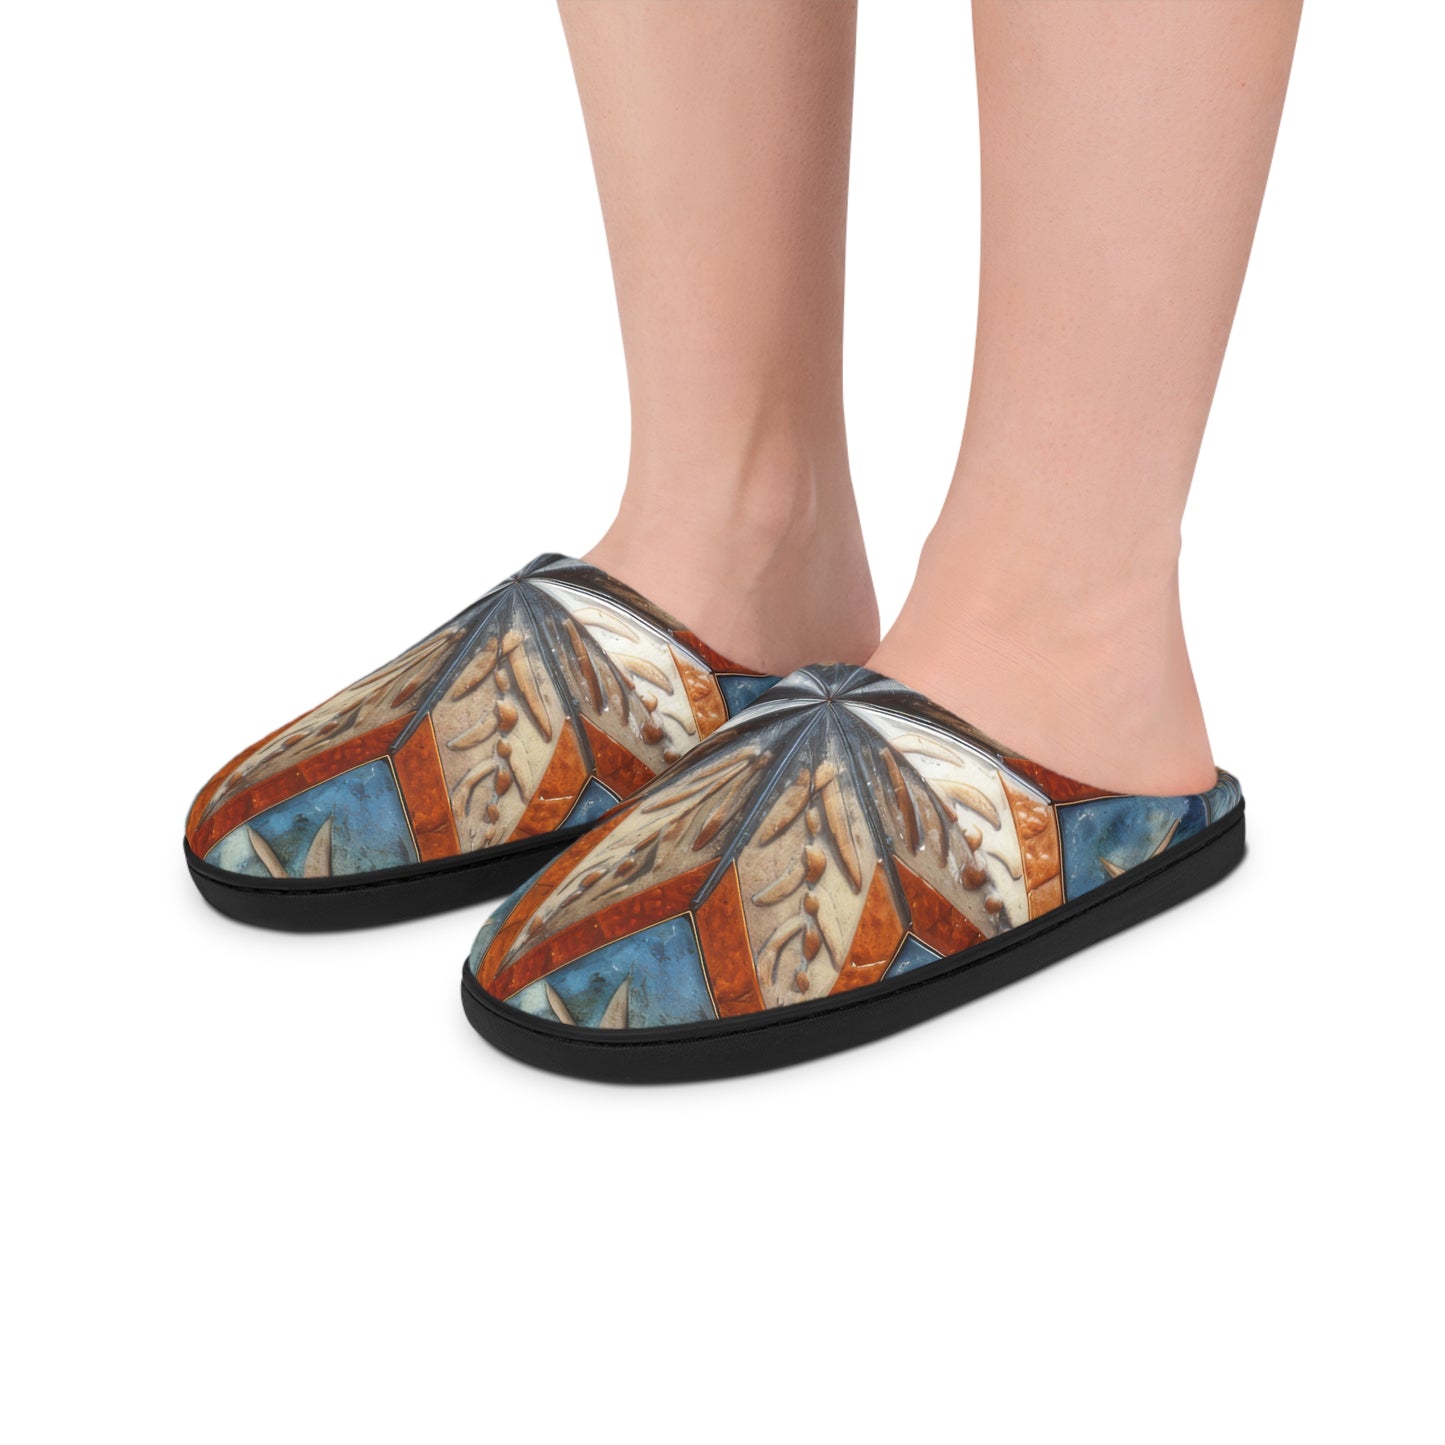 Beautiful Stars Abstract Star Style Orange, White And Blue Men's Indoor Slippers